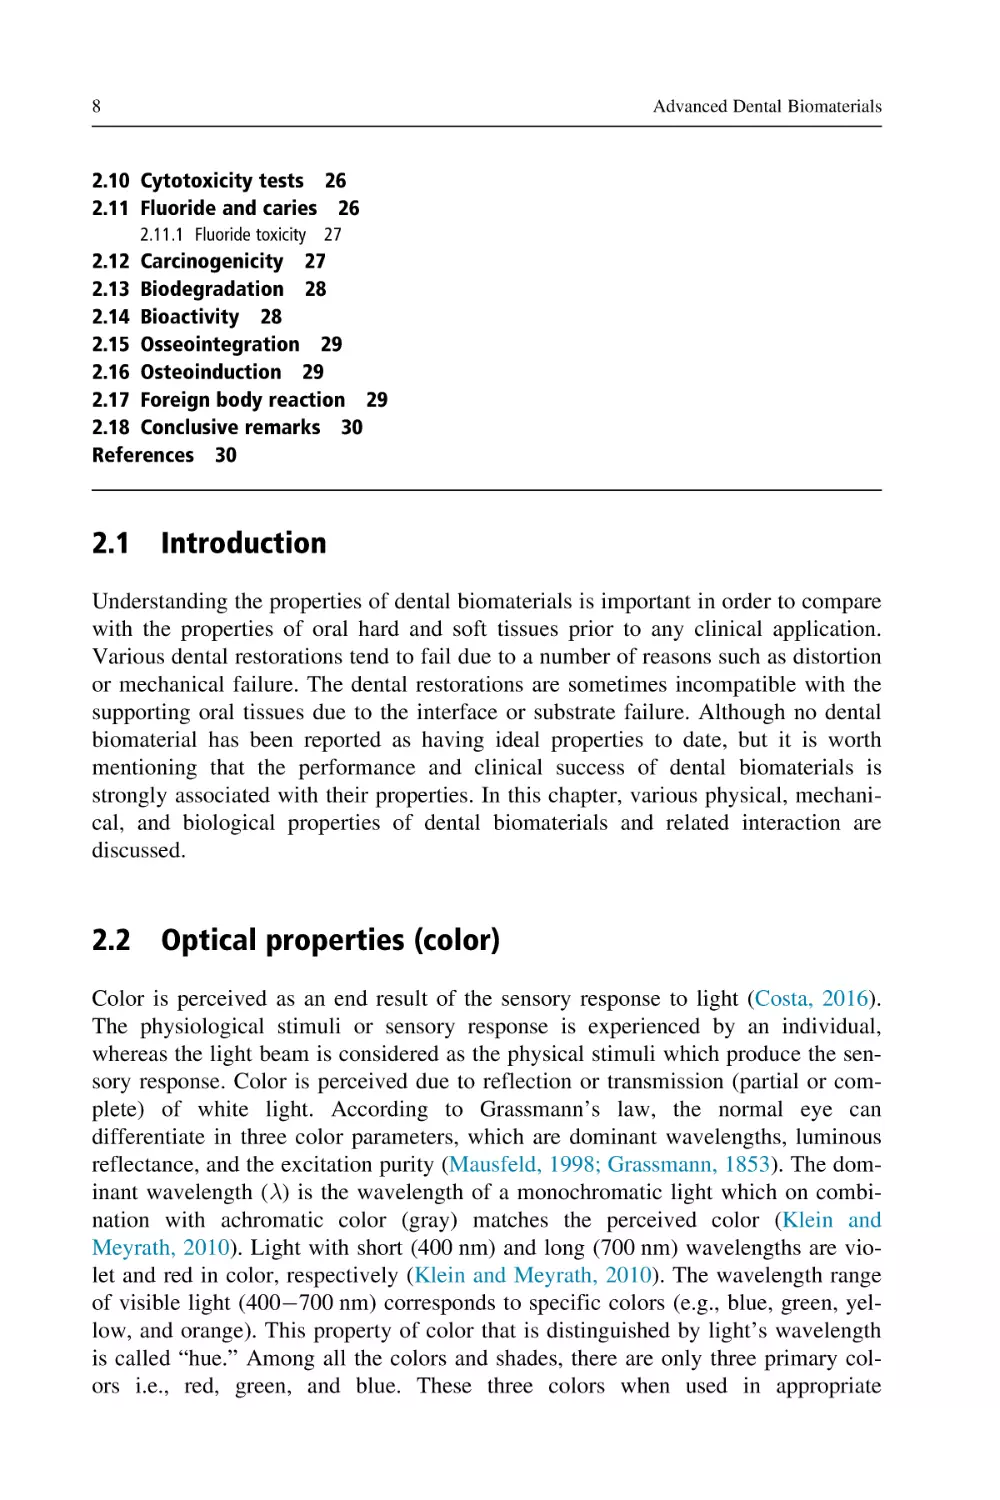 2.1 Introduction
2.2 Optical properties (color)